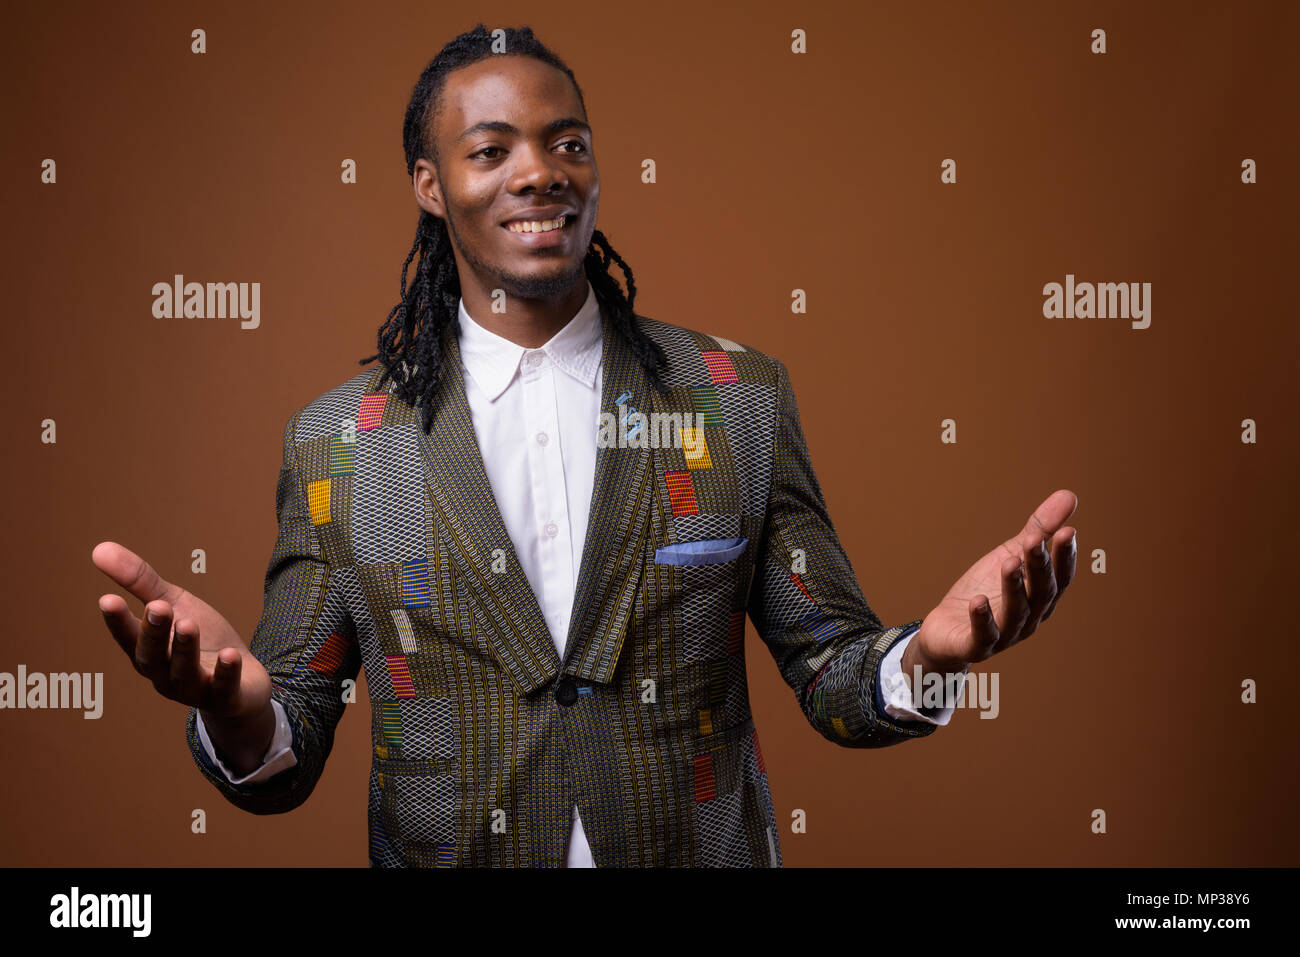 Young handsome African businessman against brown background Stock Photo